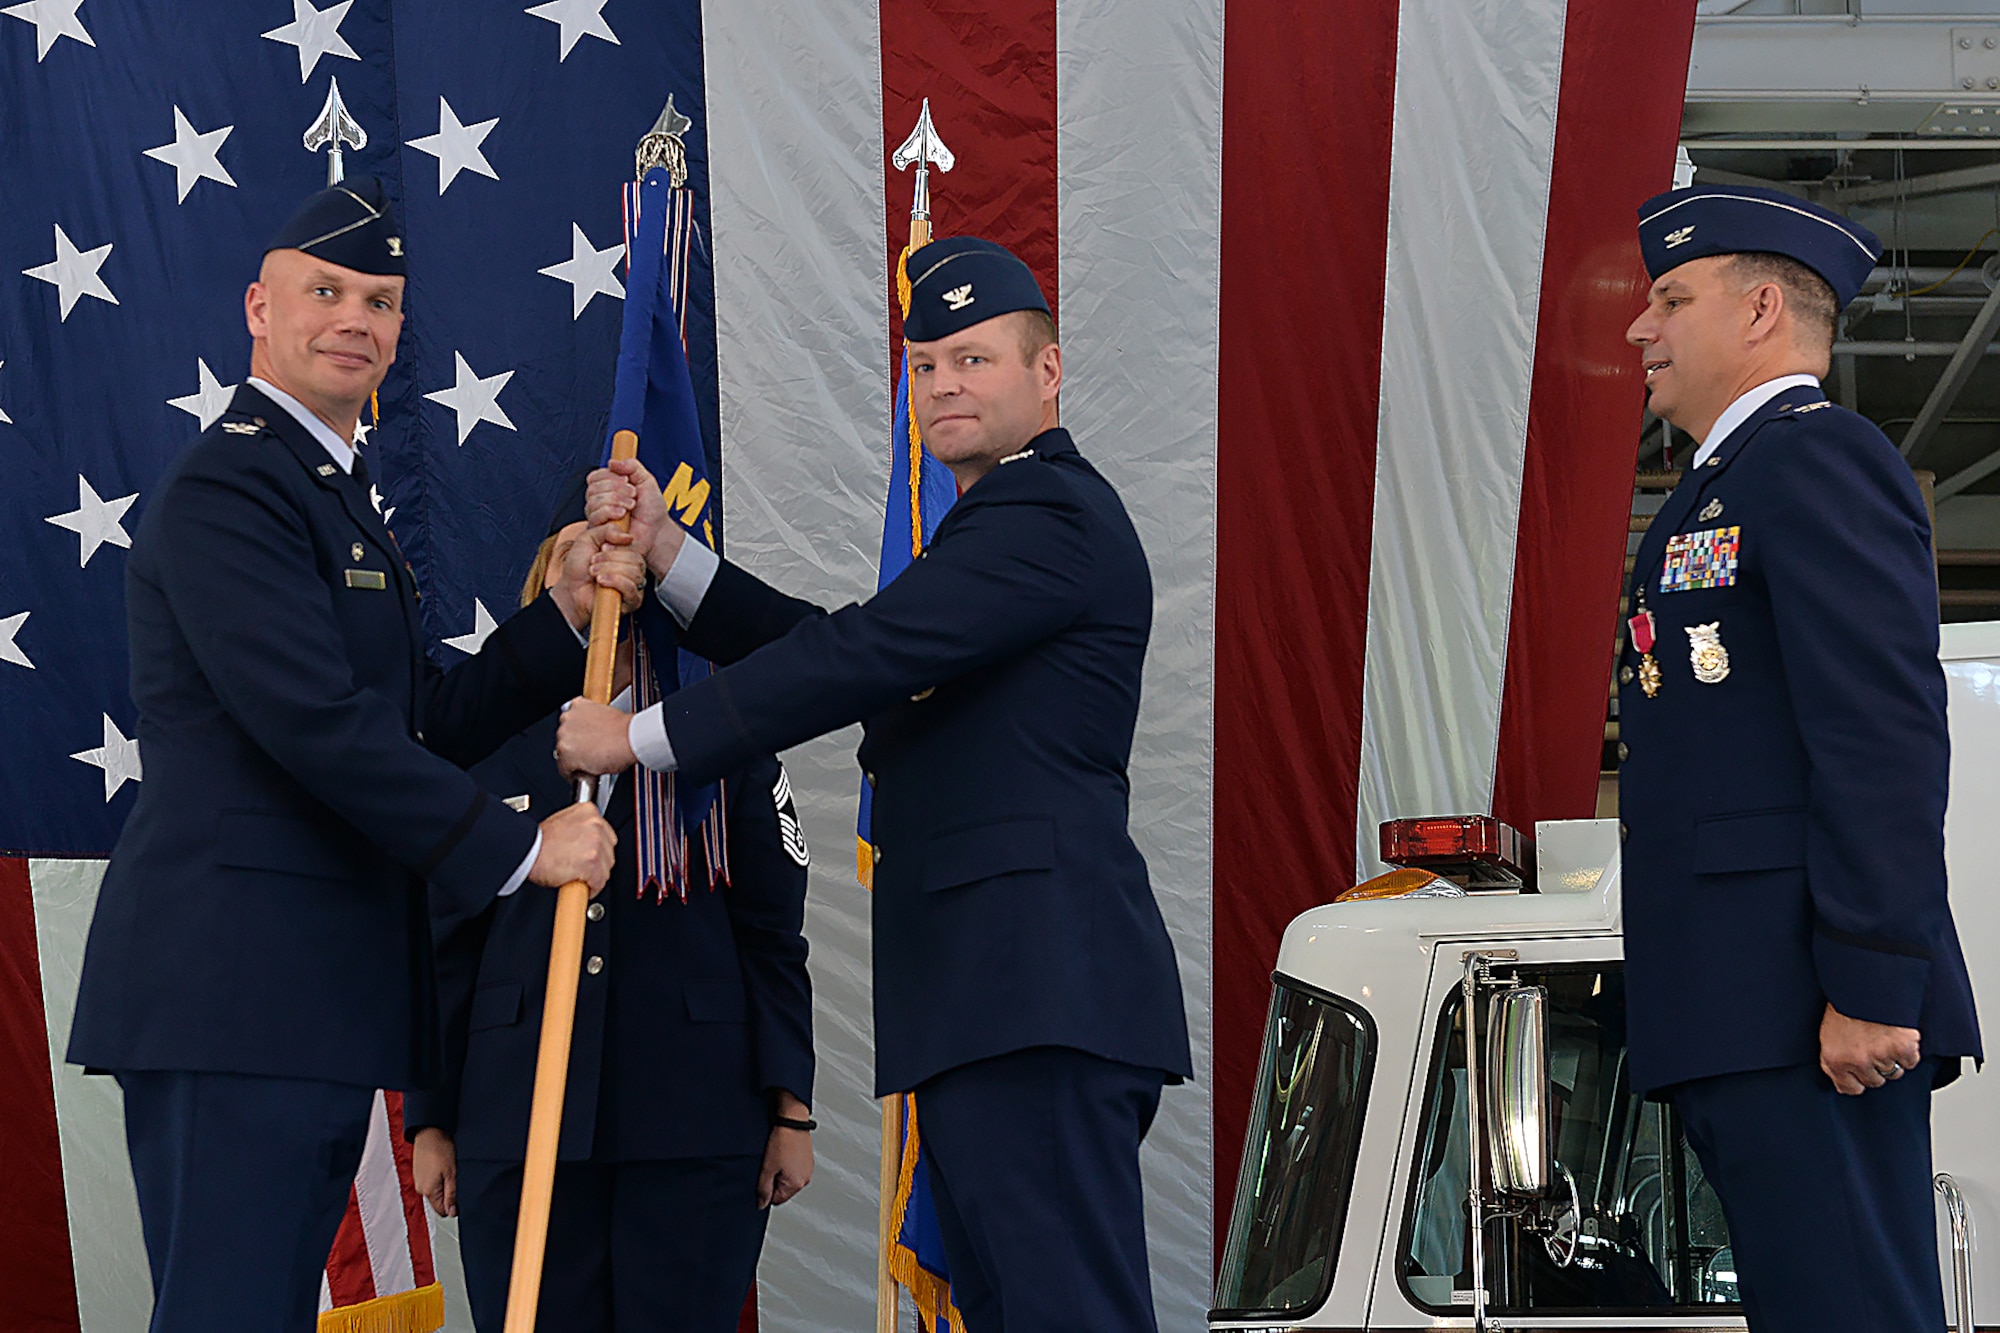 55th Wing Commander Col. Michael Manion, left, presents the 55th Mission Support Group guidon to Col. David Norton, center, as he accepts command of the 55th MSG at Offutt Air Force Base, Nebraska, July 14, 2017. Outgoing 55th MSG Commander Col. Matthew Joganich, right, surrendered command of the 55th MSG, which is responsible for five squadrons encompassing 1,600 individuals who support Air Combat Command’s largest wing and over 50 tenant units.